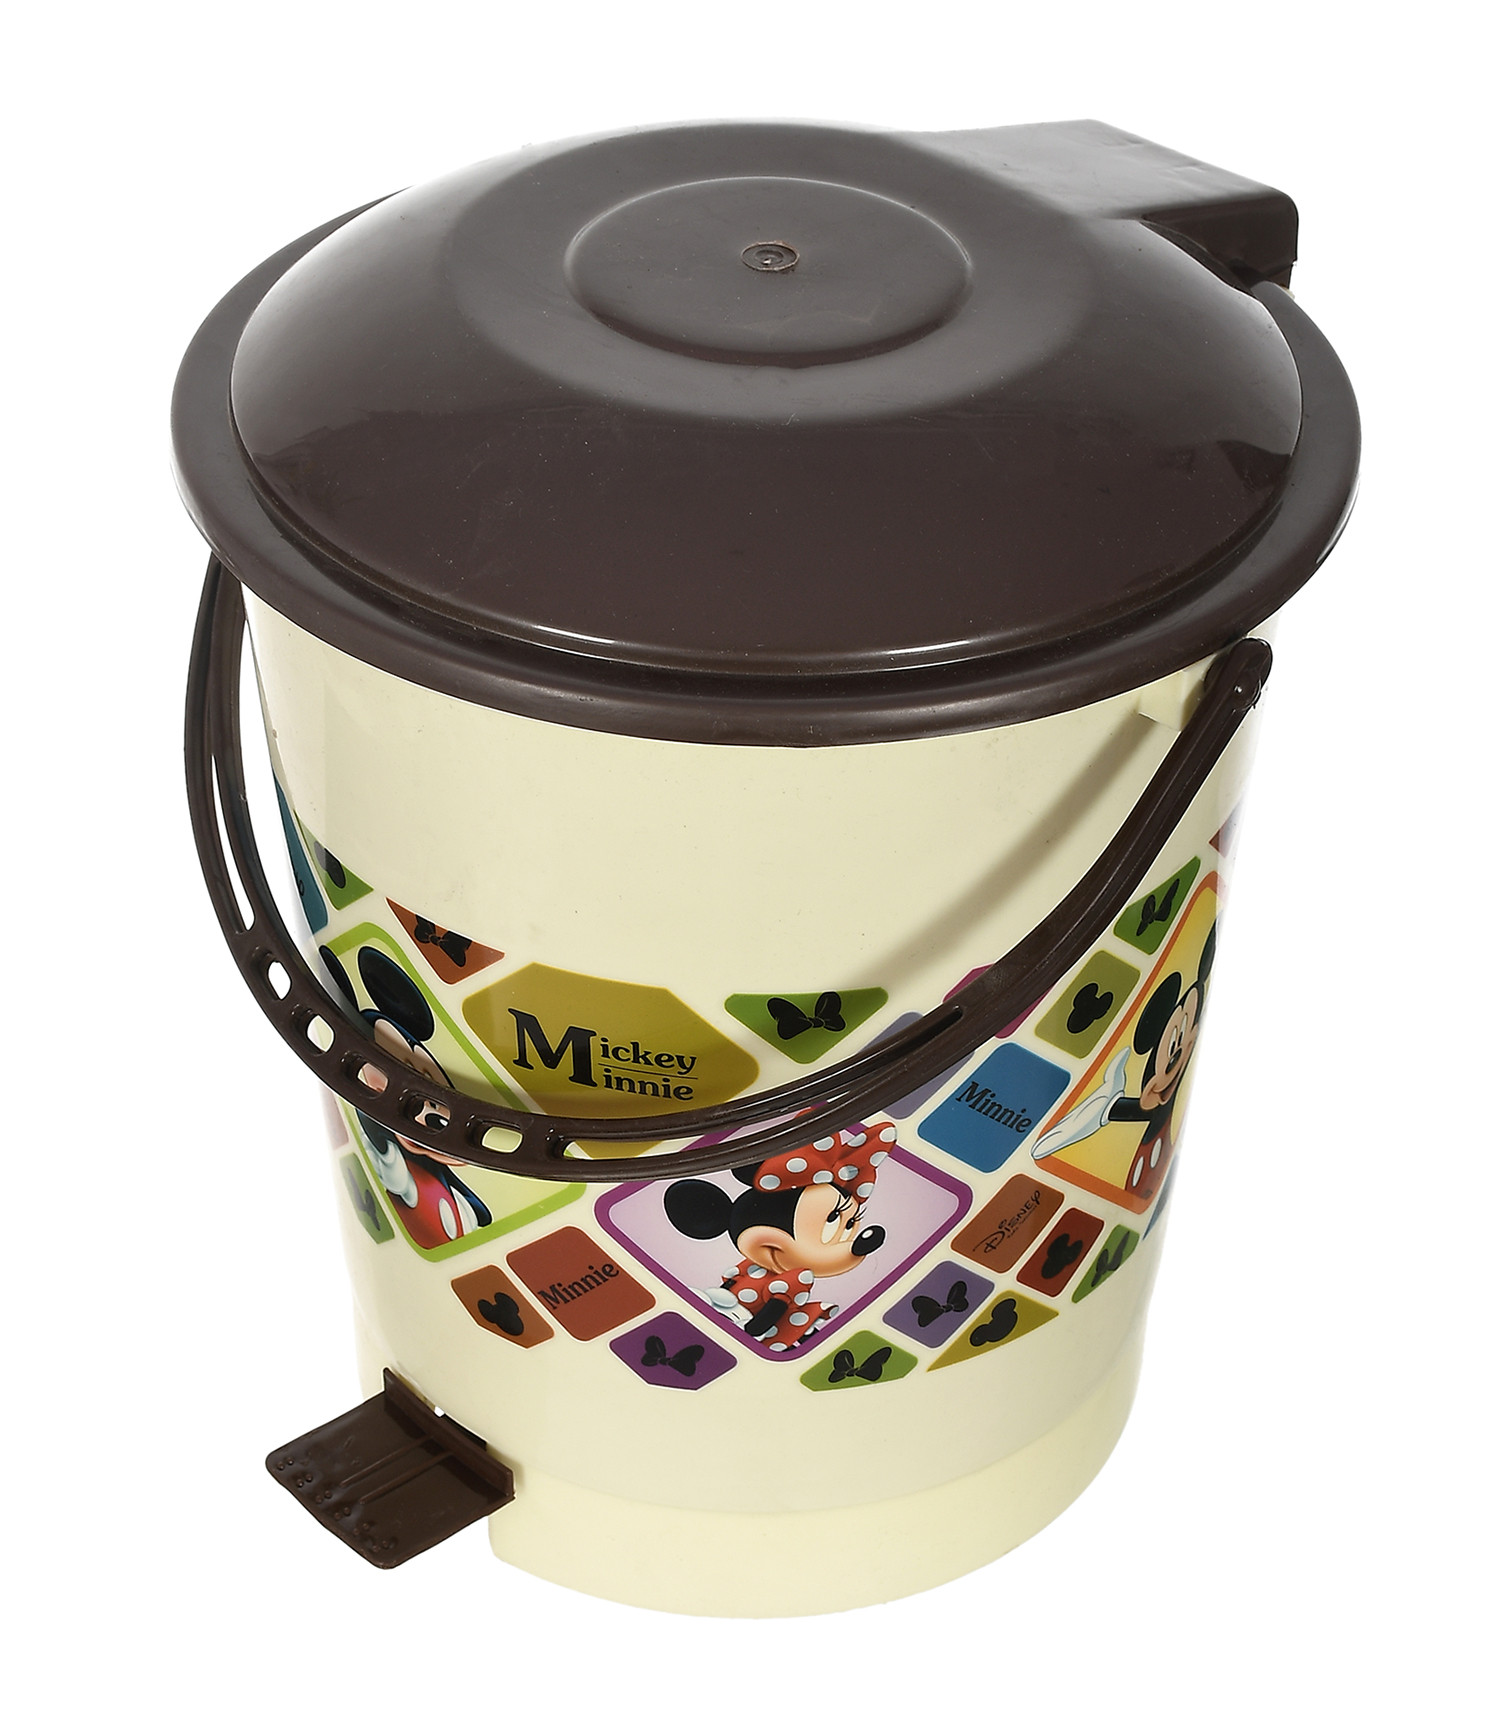 Kuber Industries Multiuses Mickey Mouse Print Plastic Dustbin For Home, Kitchen, Office, Bathroom With Swing Lid 10 Litre (Cream)